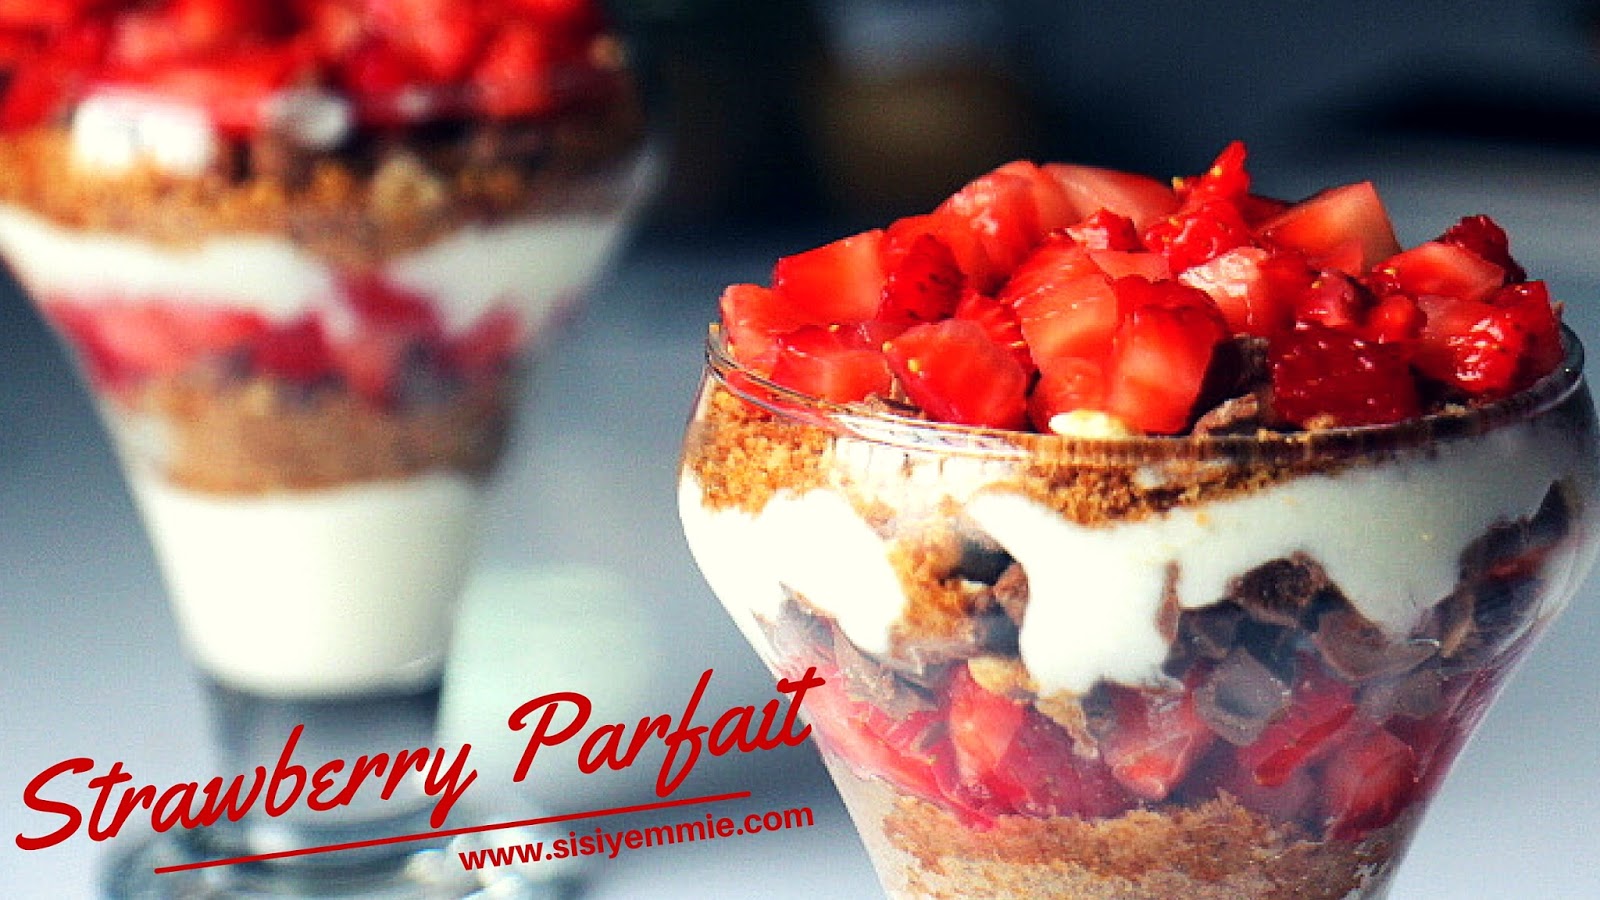 HOW TO MAKE A STRAWBERRY PARFAIT picture